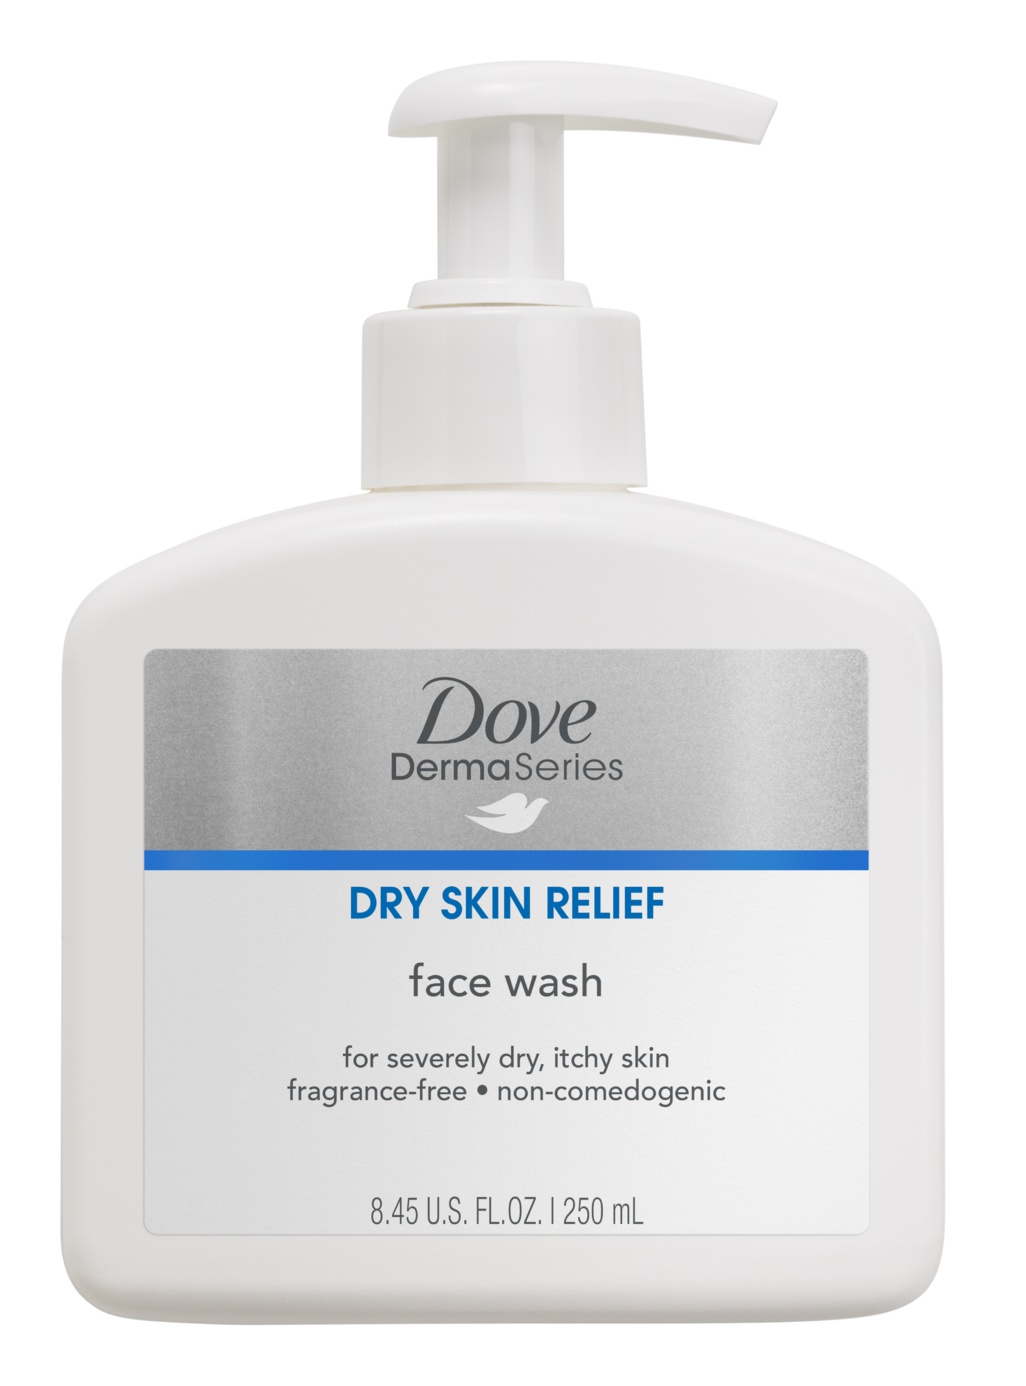 Dove Dermaseries Dry Skin Relief Milky Face Wash